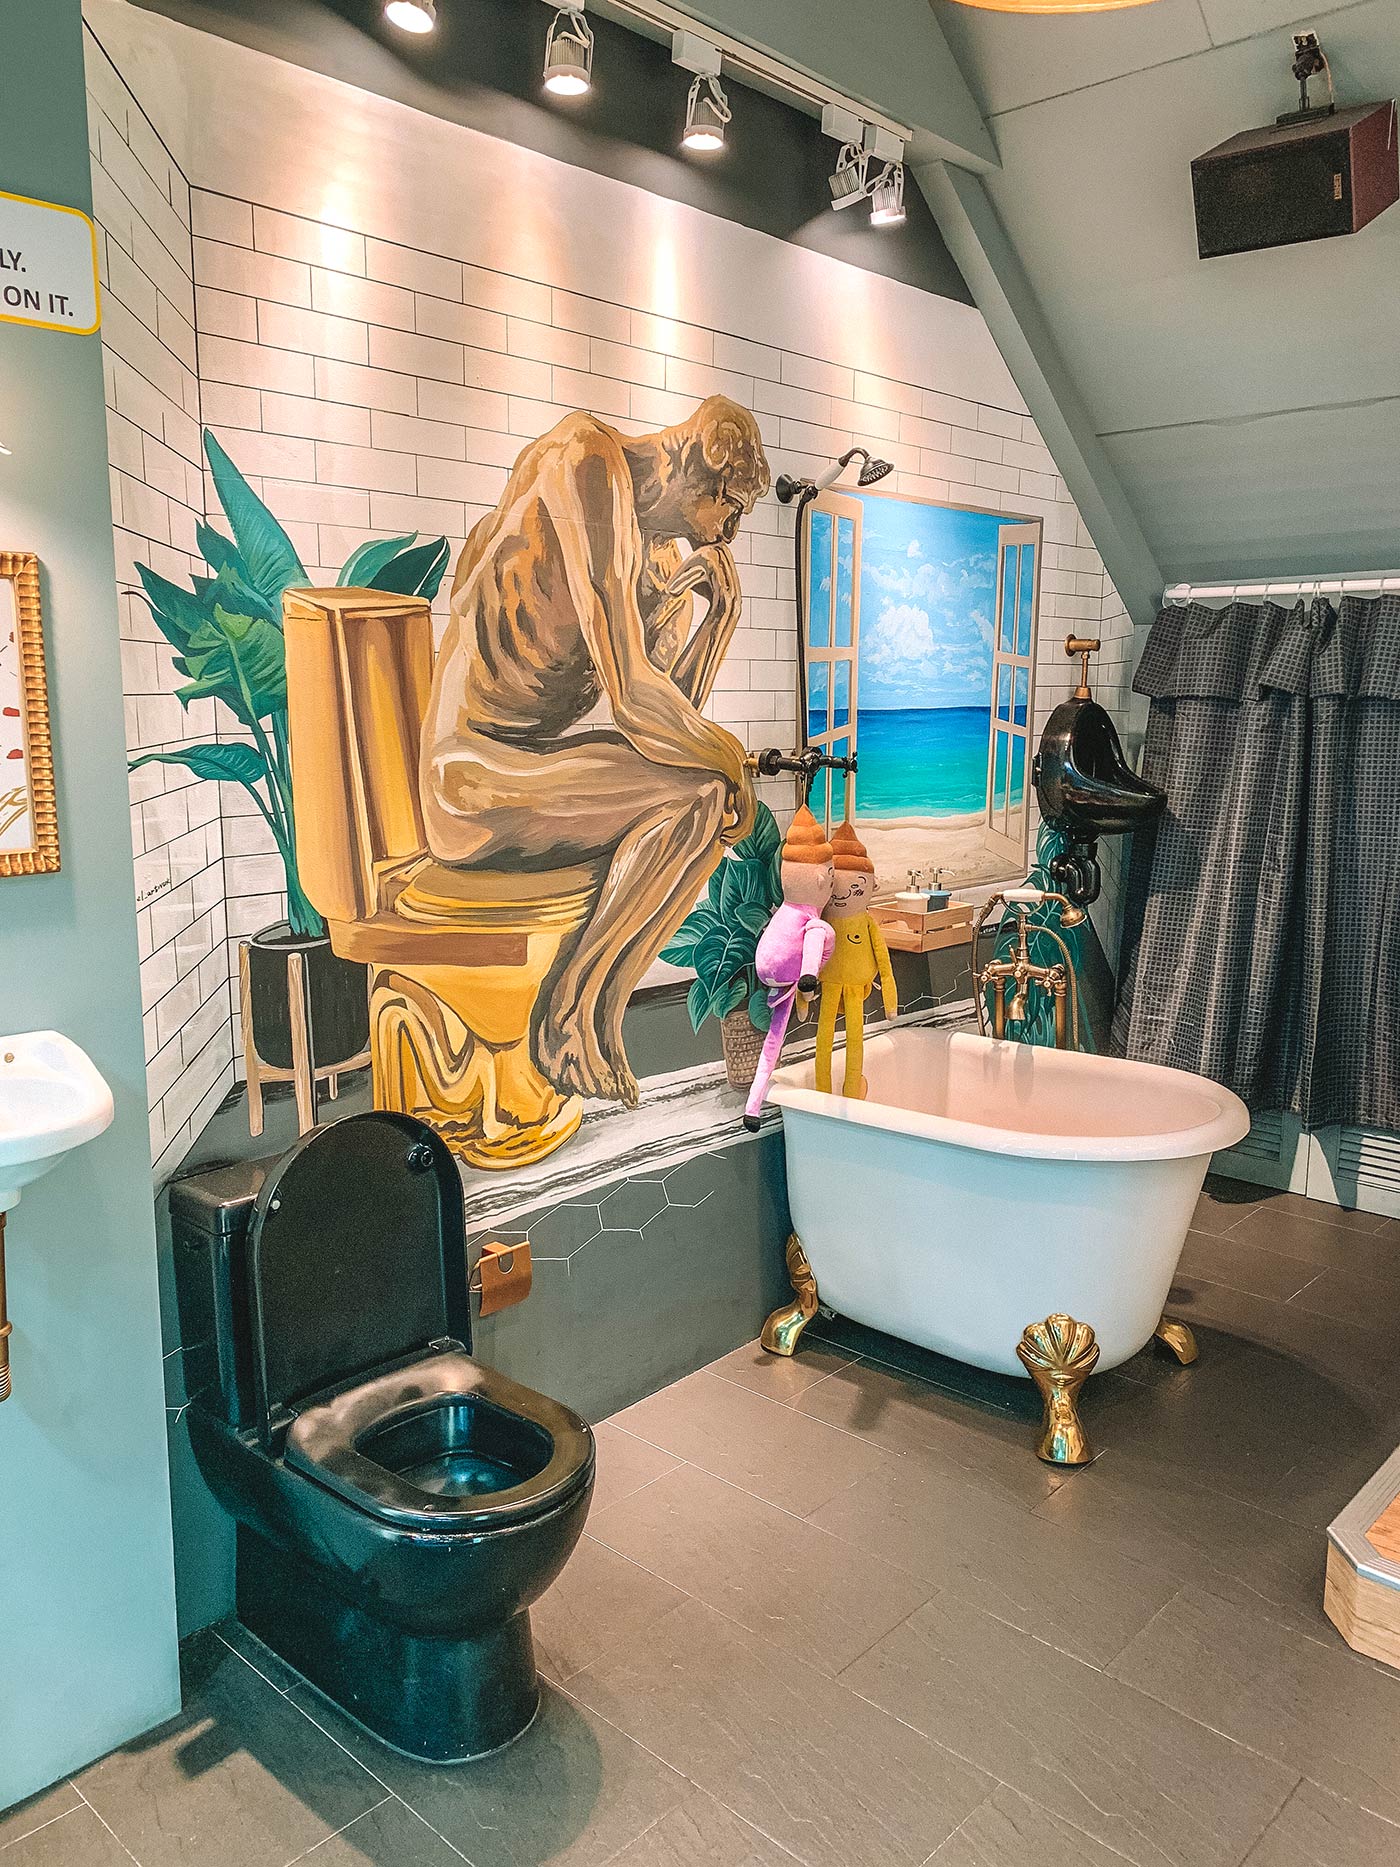 Taiwan's Toilet-Themed Cafe AKA The Poop Cafe